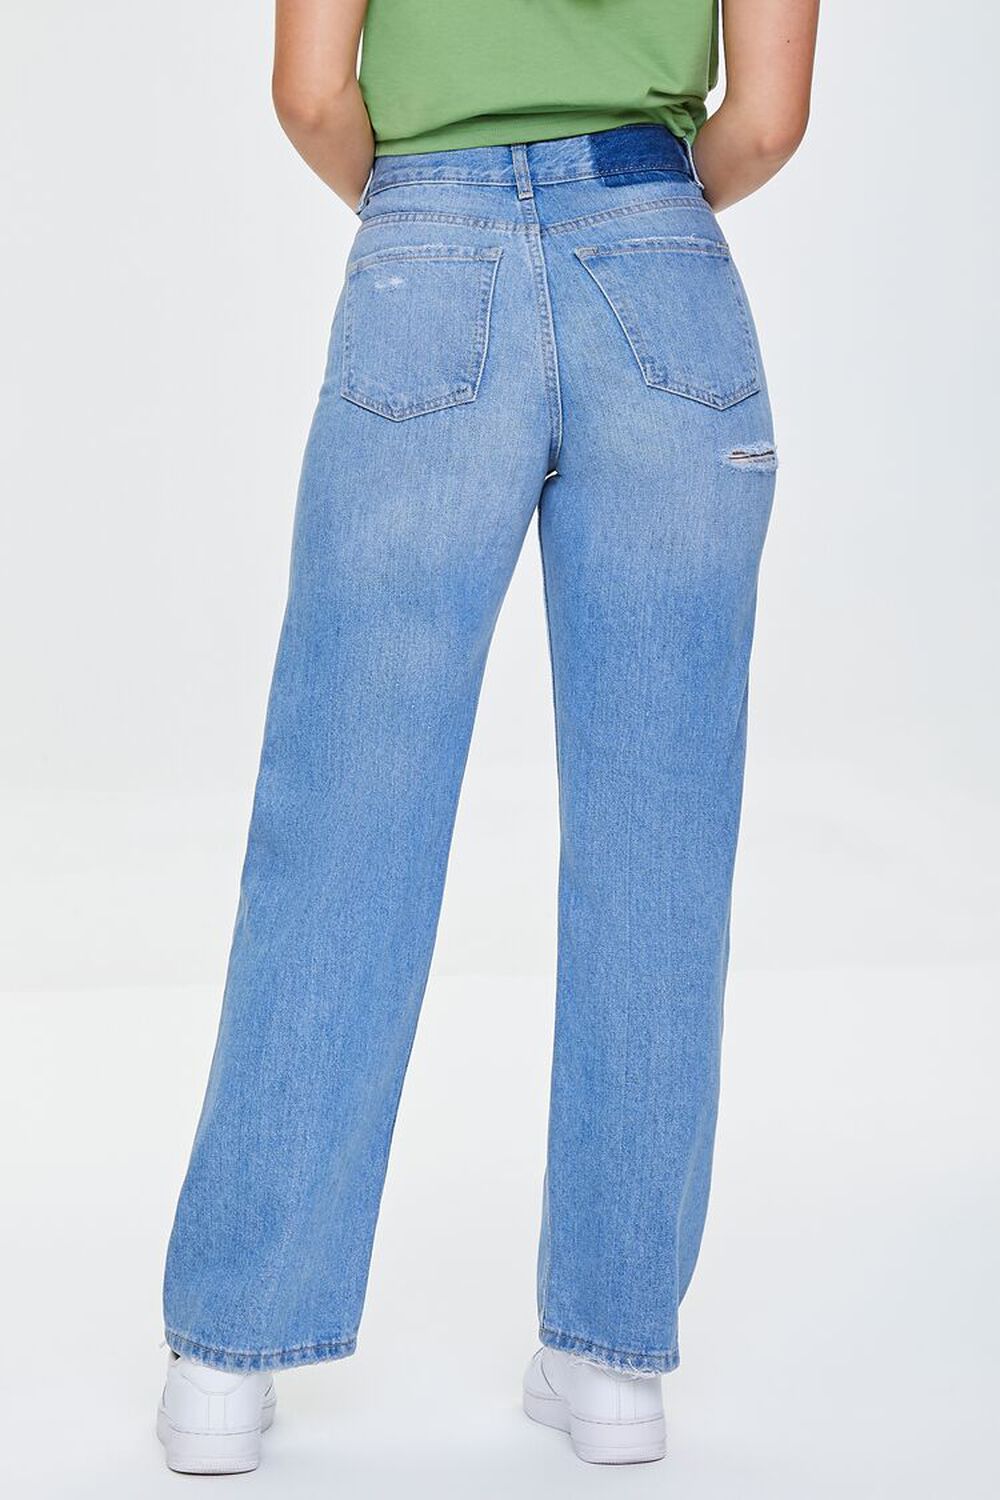 90s-Fit Straight-Leg Jeans